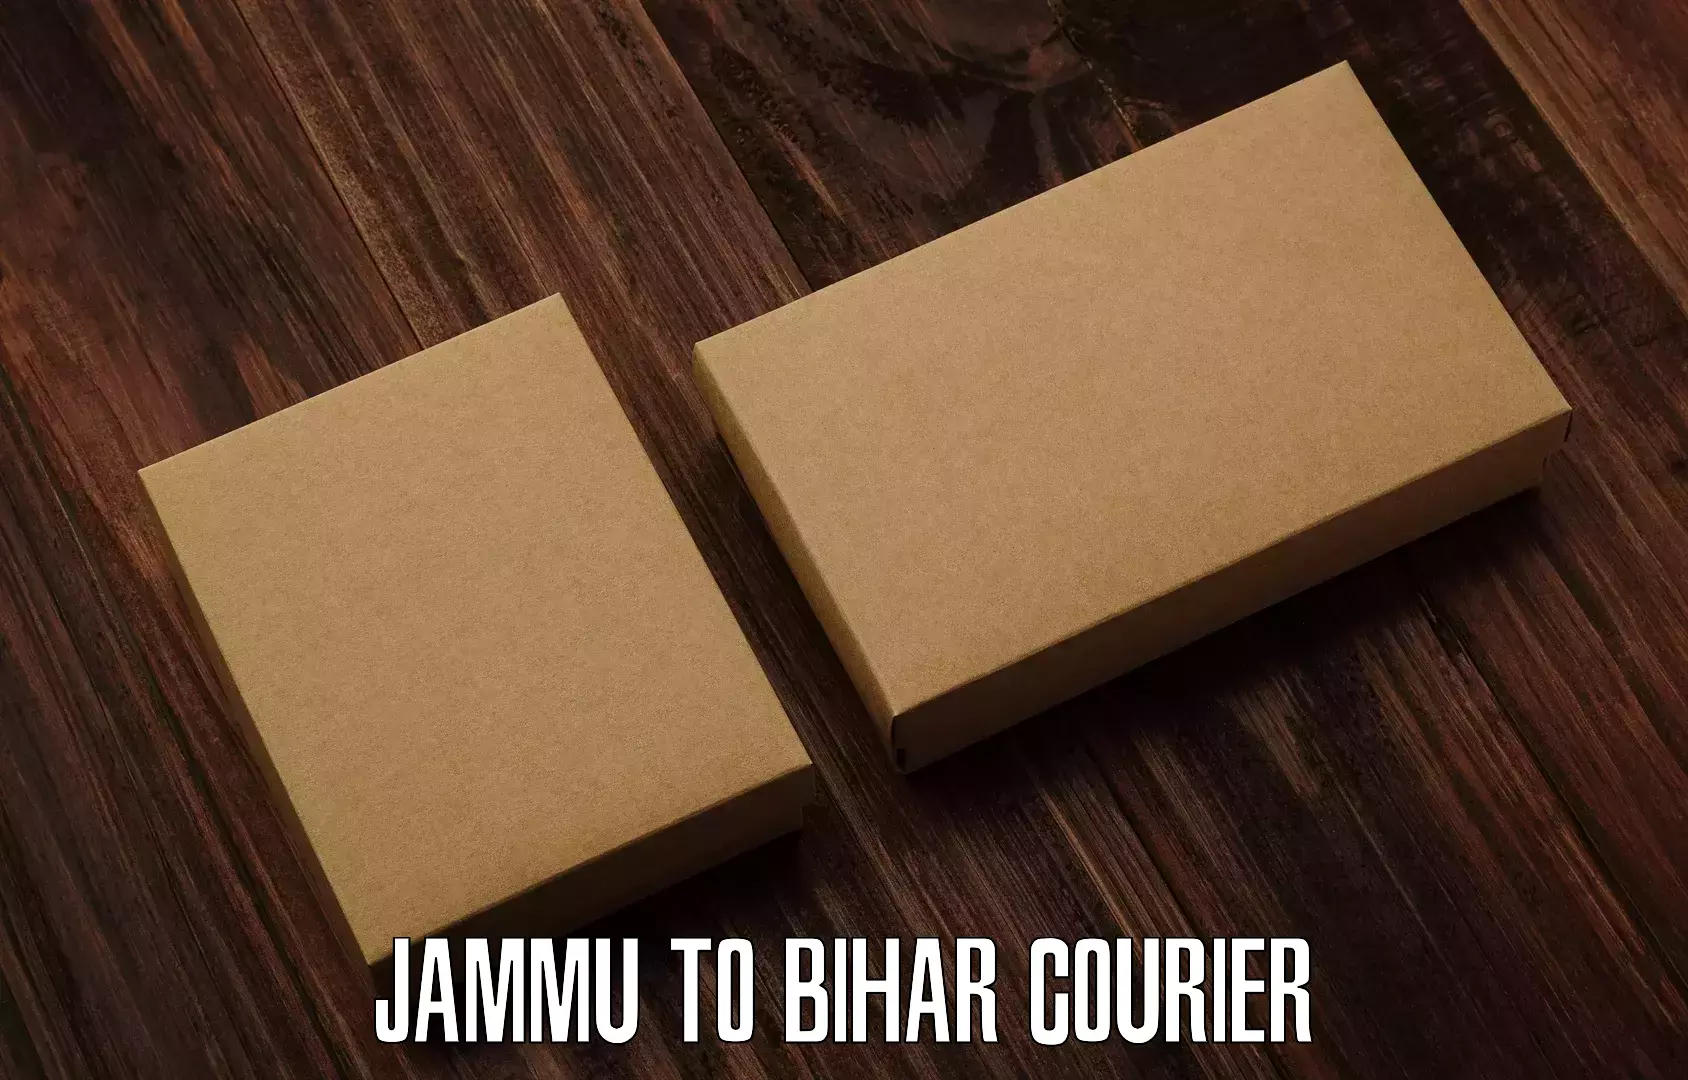 24-hour delivery options Jammu to Maheshkhunt